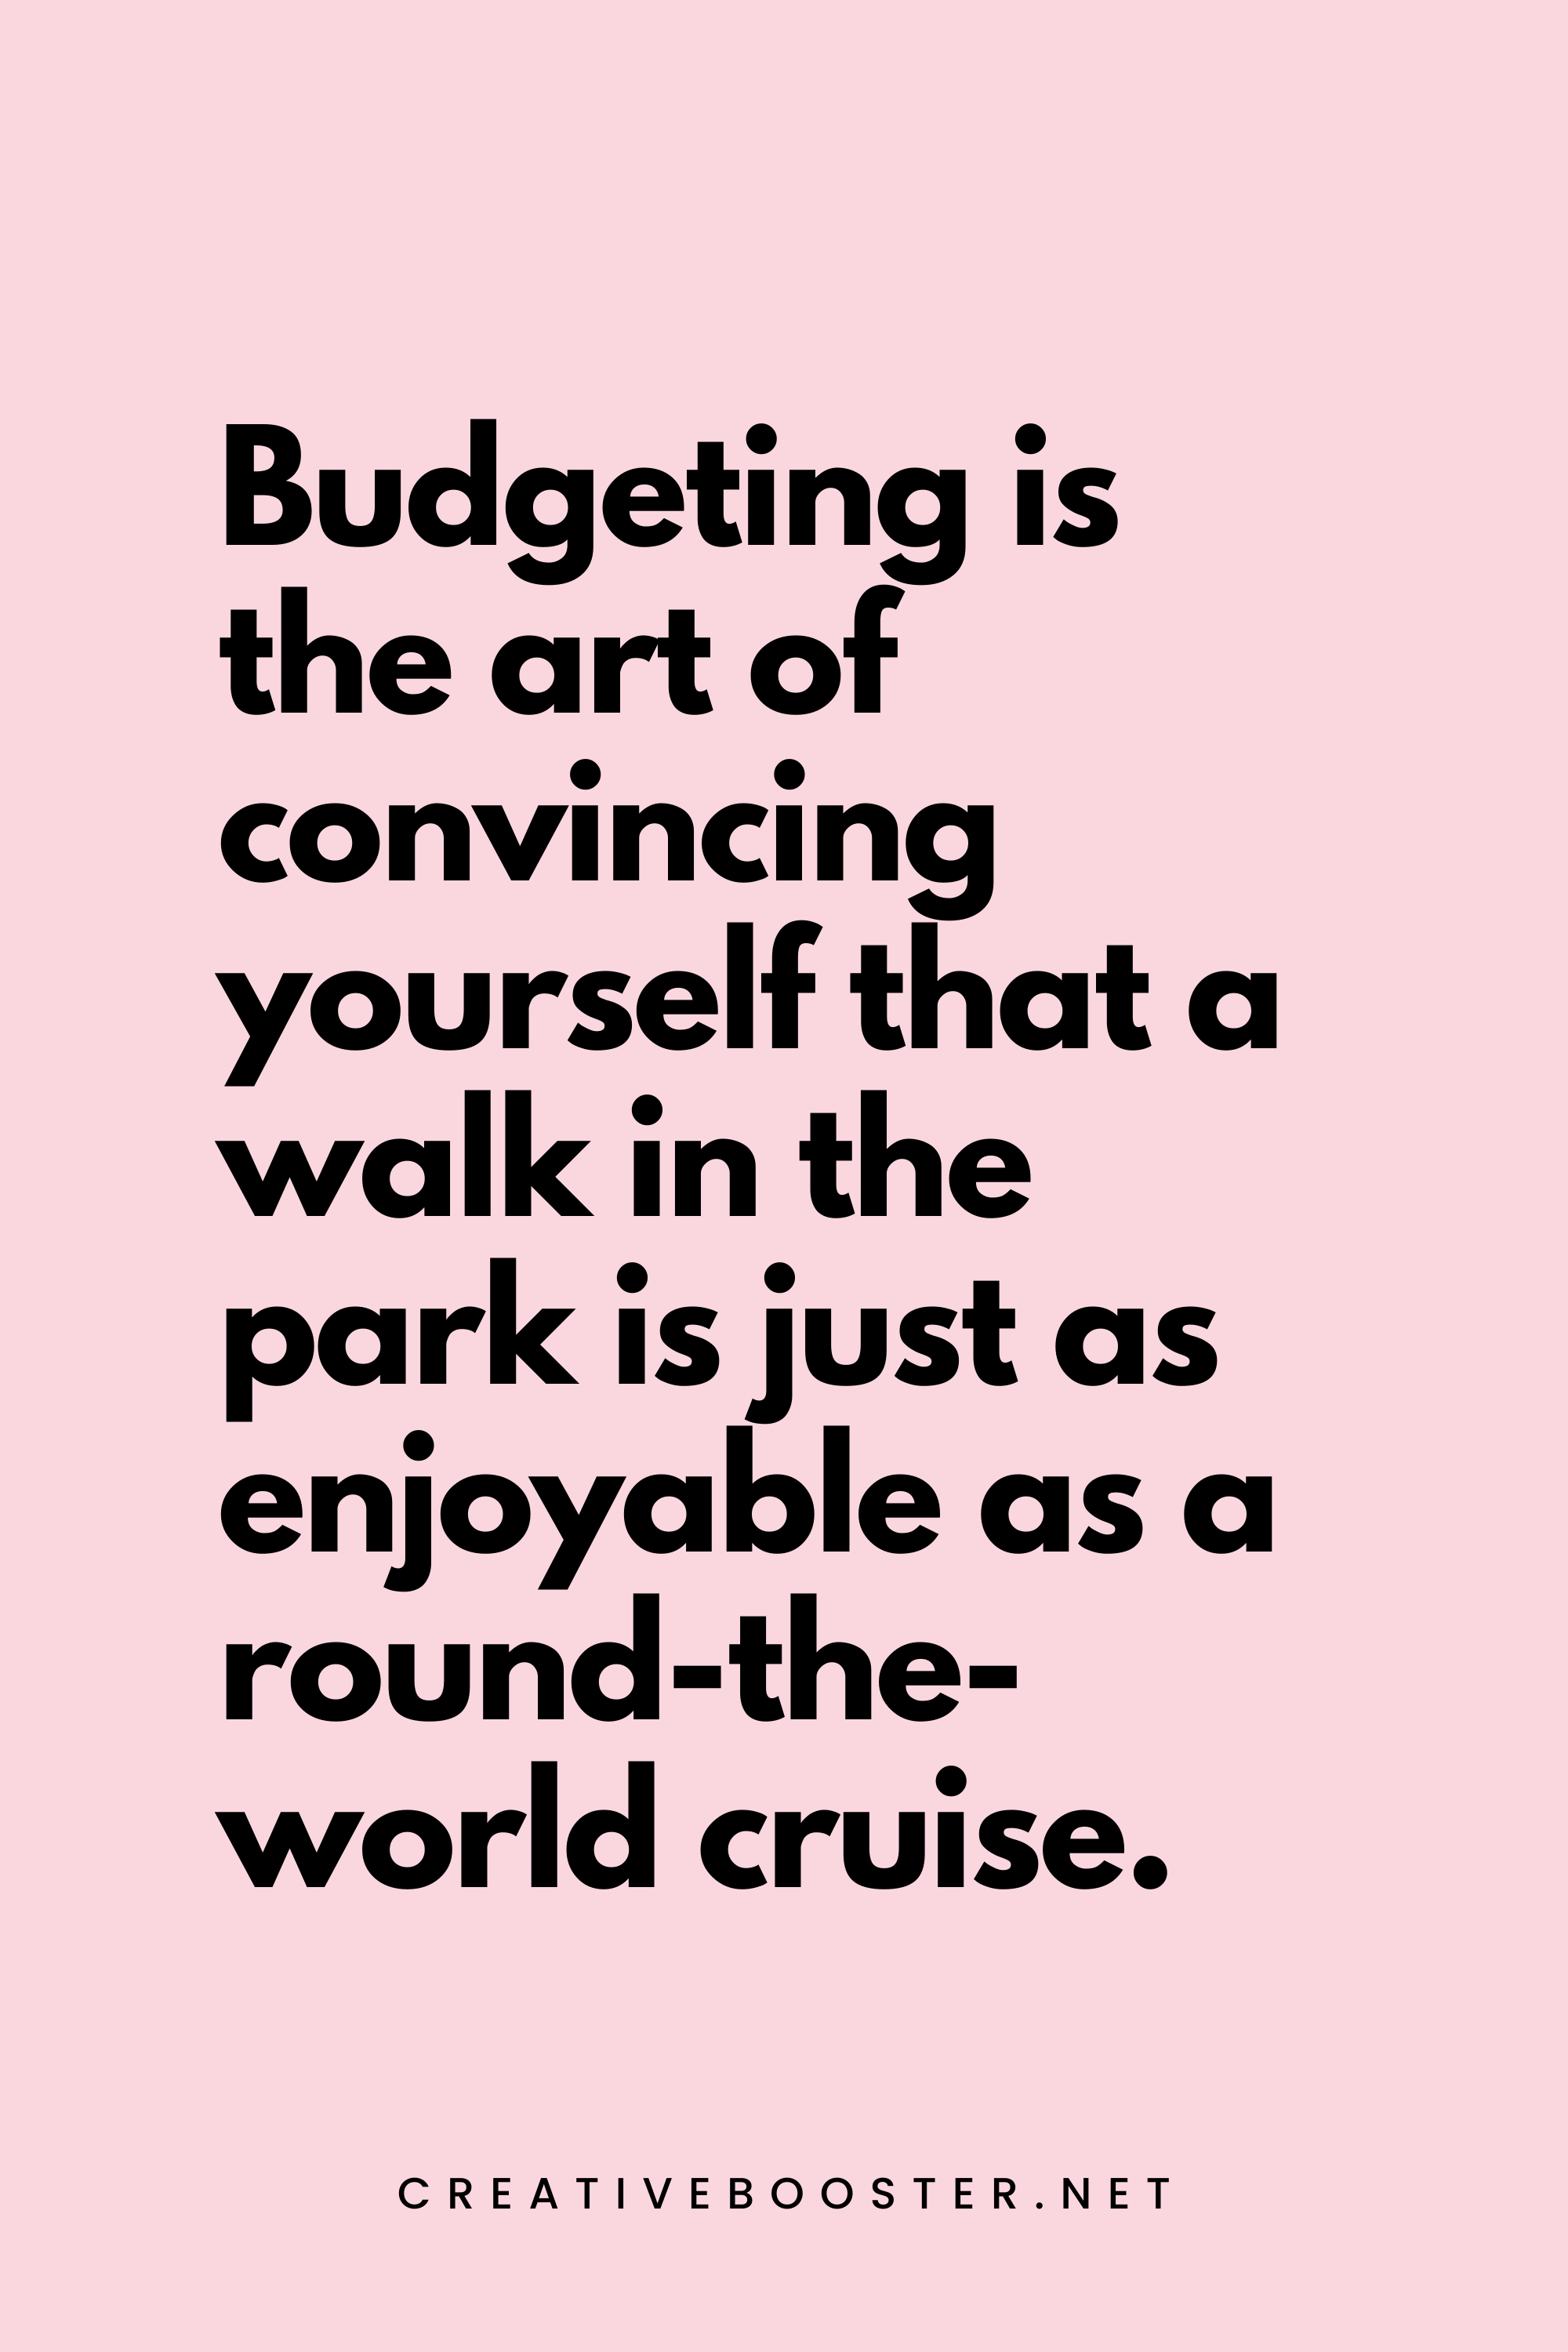 63. Budgeting is the art of convincing yourself that a walk in the park is just as enjoyable as a round-the-world cruise. - Creativebooster.net - 6. Funny Financial Freedom Quotes